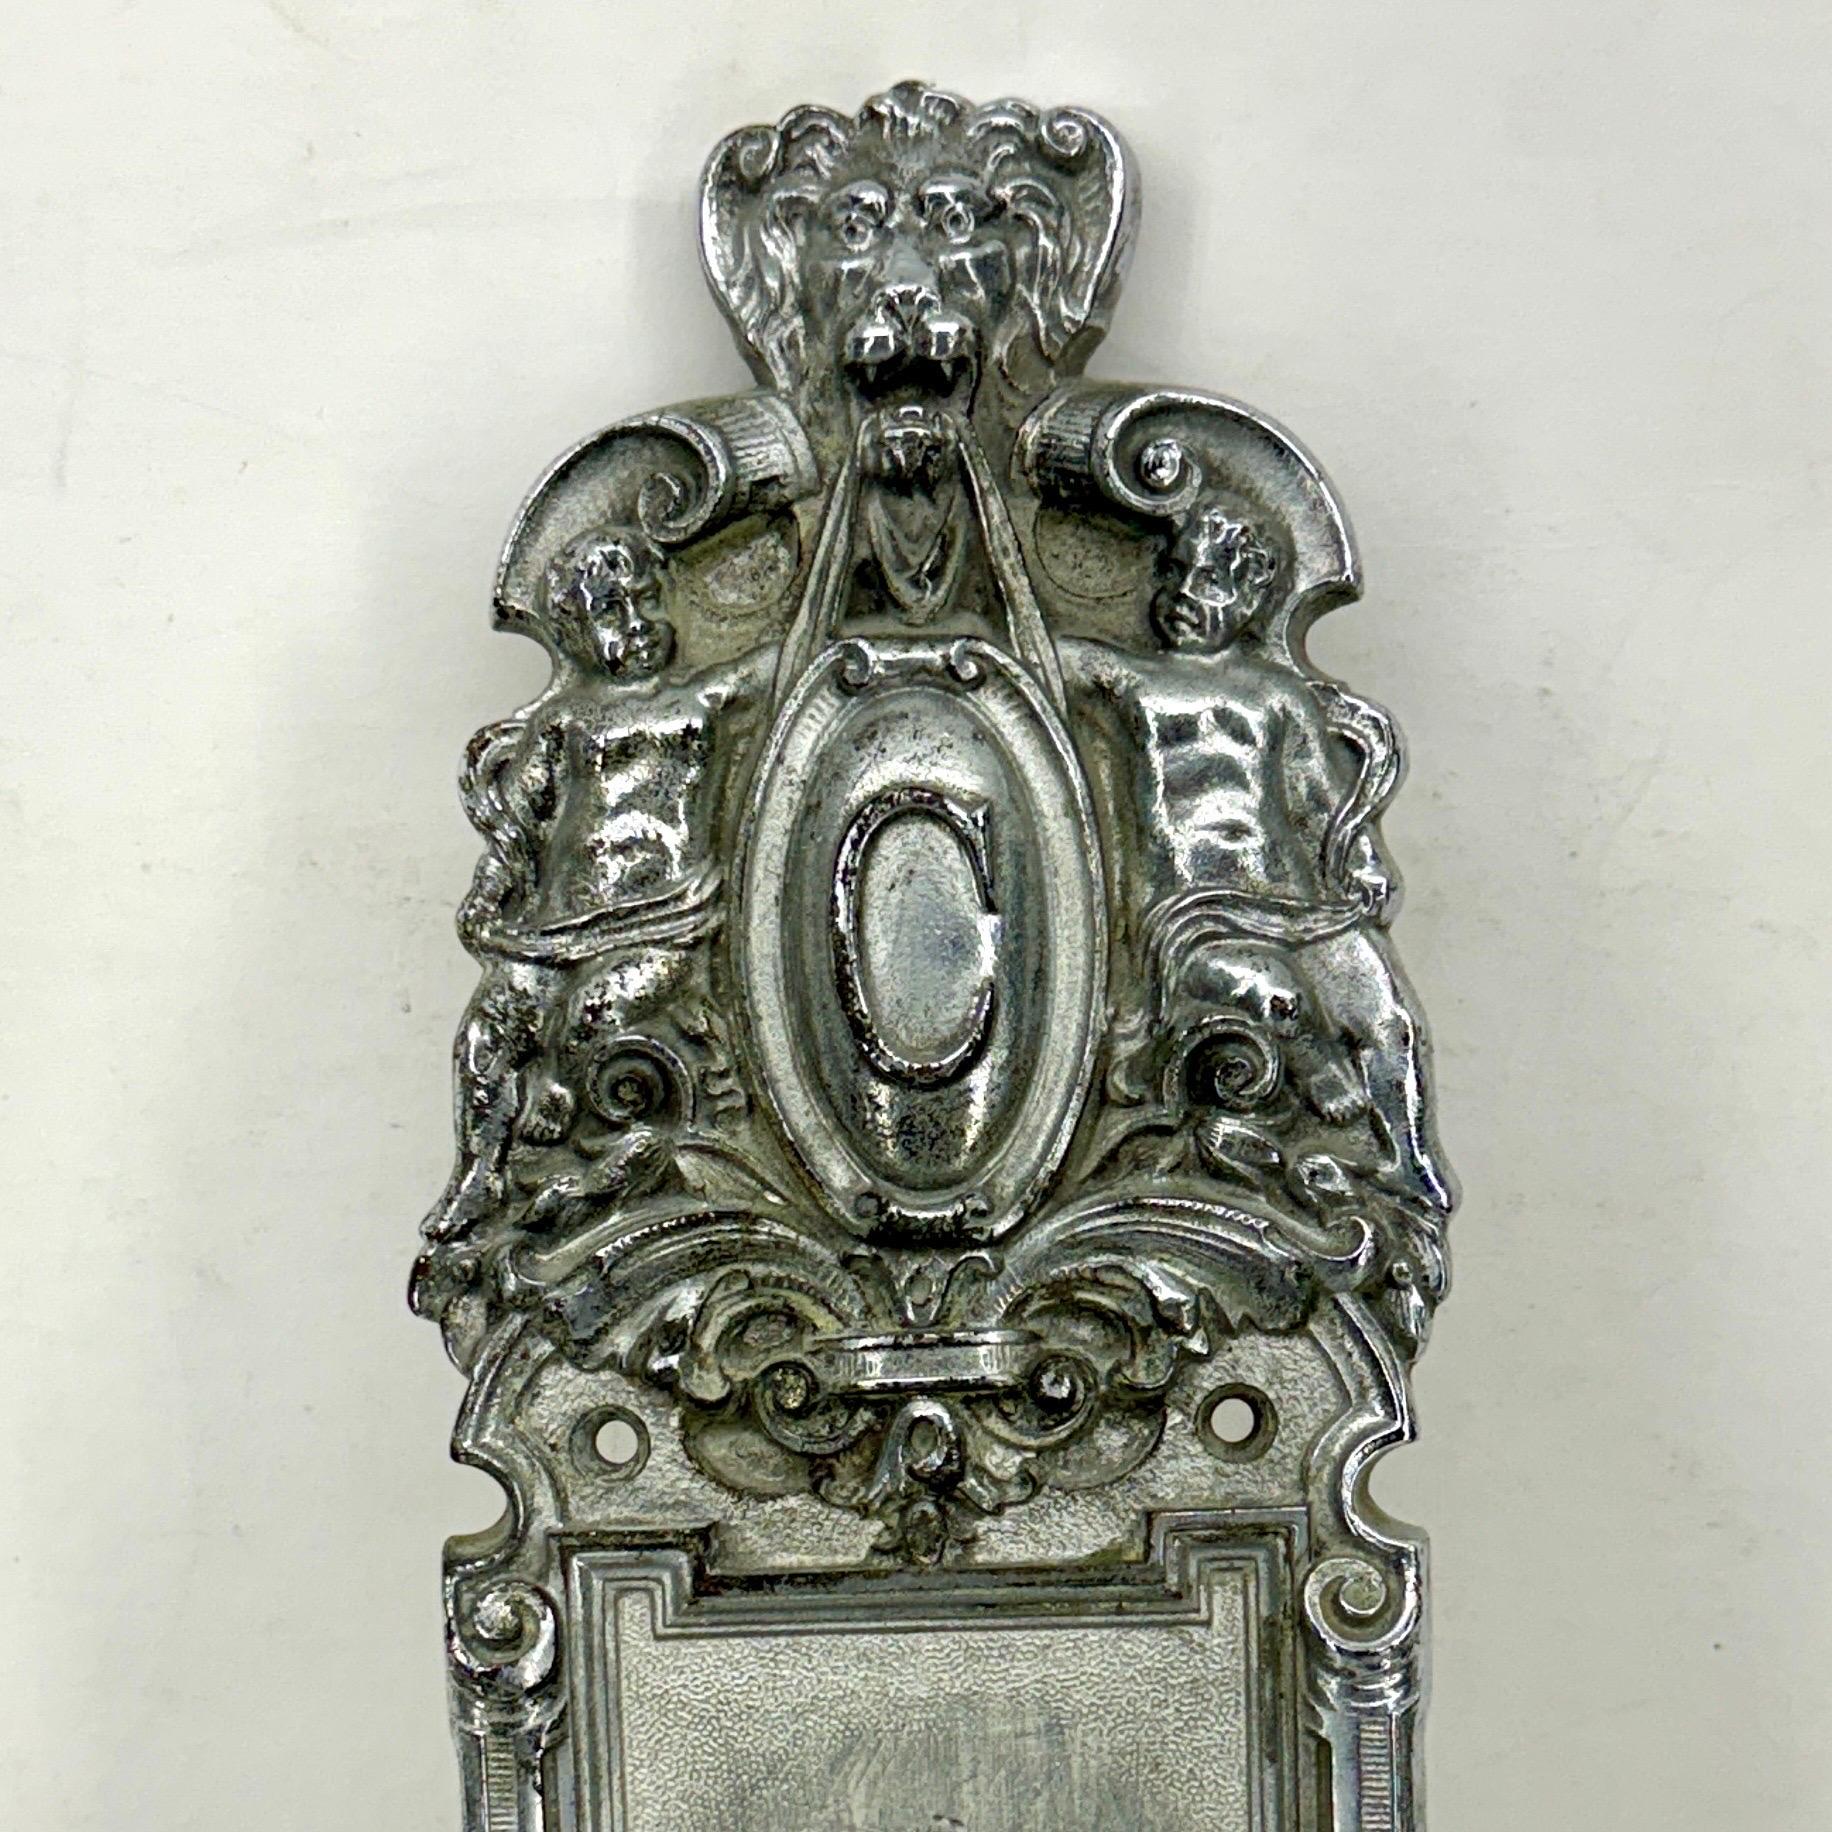 Hand-Crafted Italian Rococo Exterior Chromed Door Handle Monogramed with C For Sale